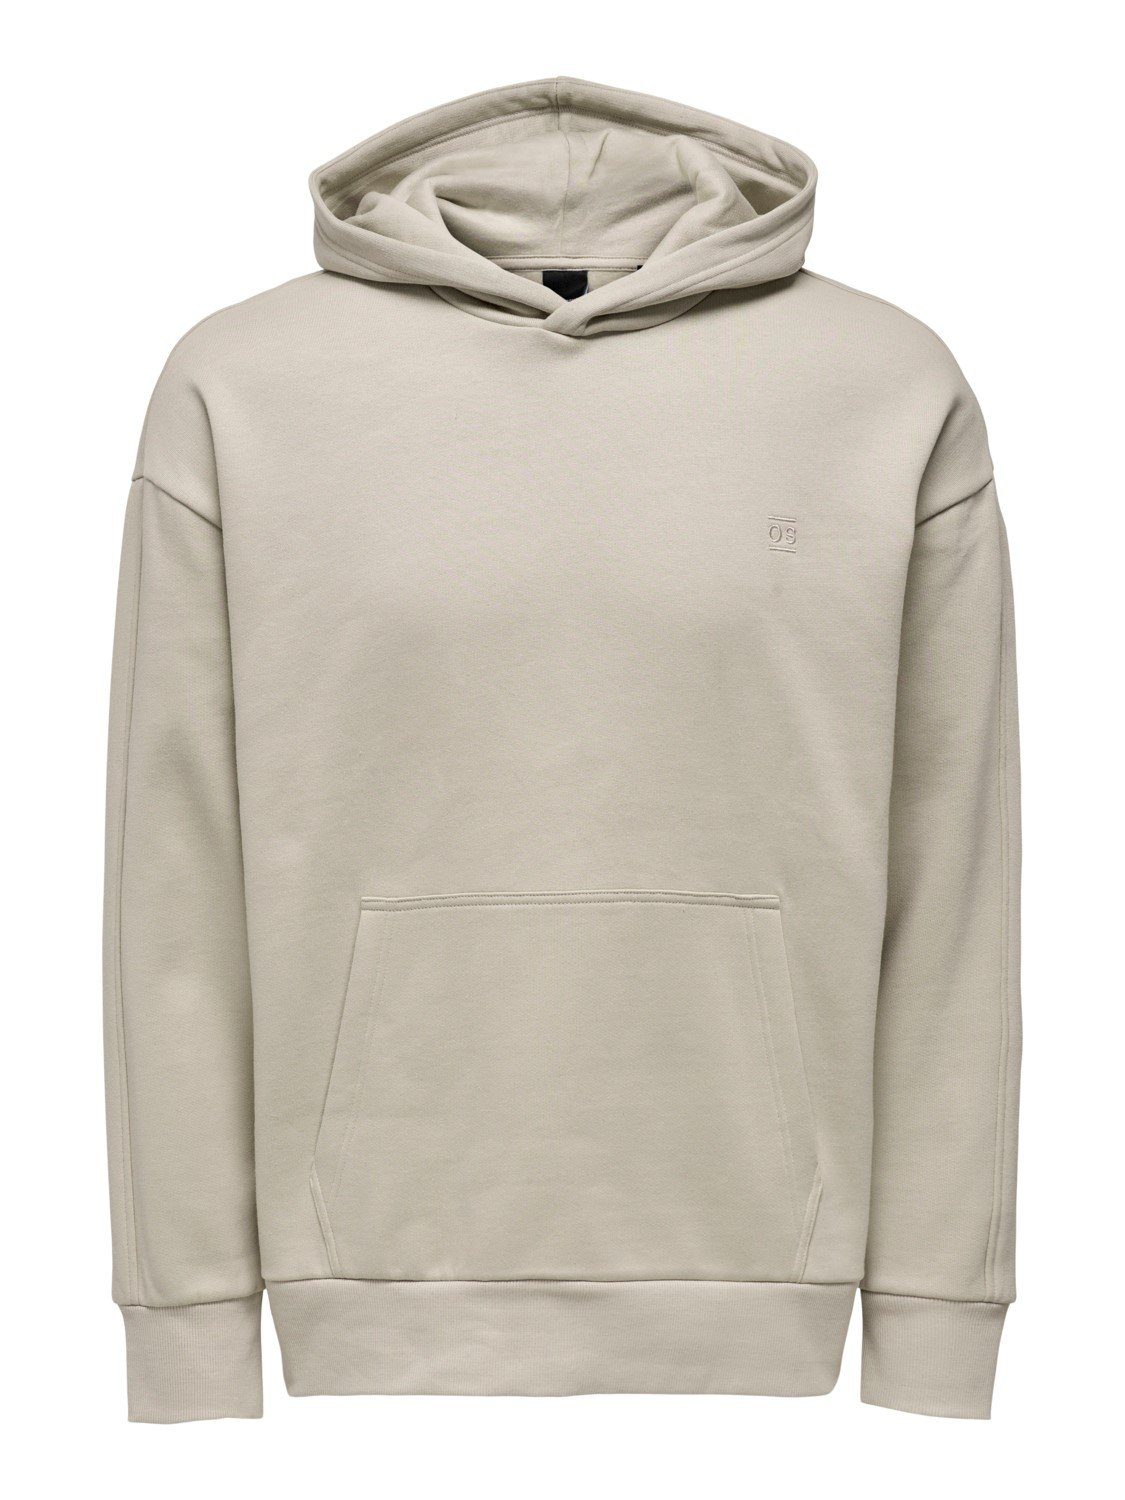 LIFE & ONLY Baumwolle 22026661 Hoodie ONSDAN aus Lining SONS Silver